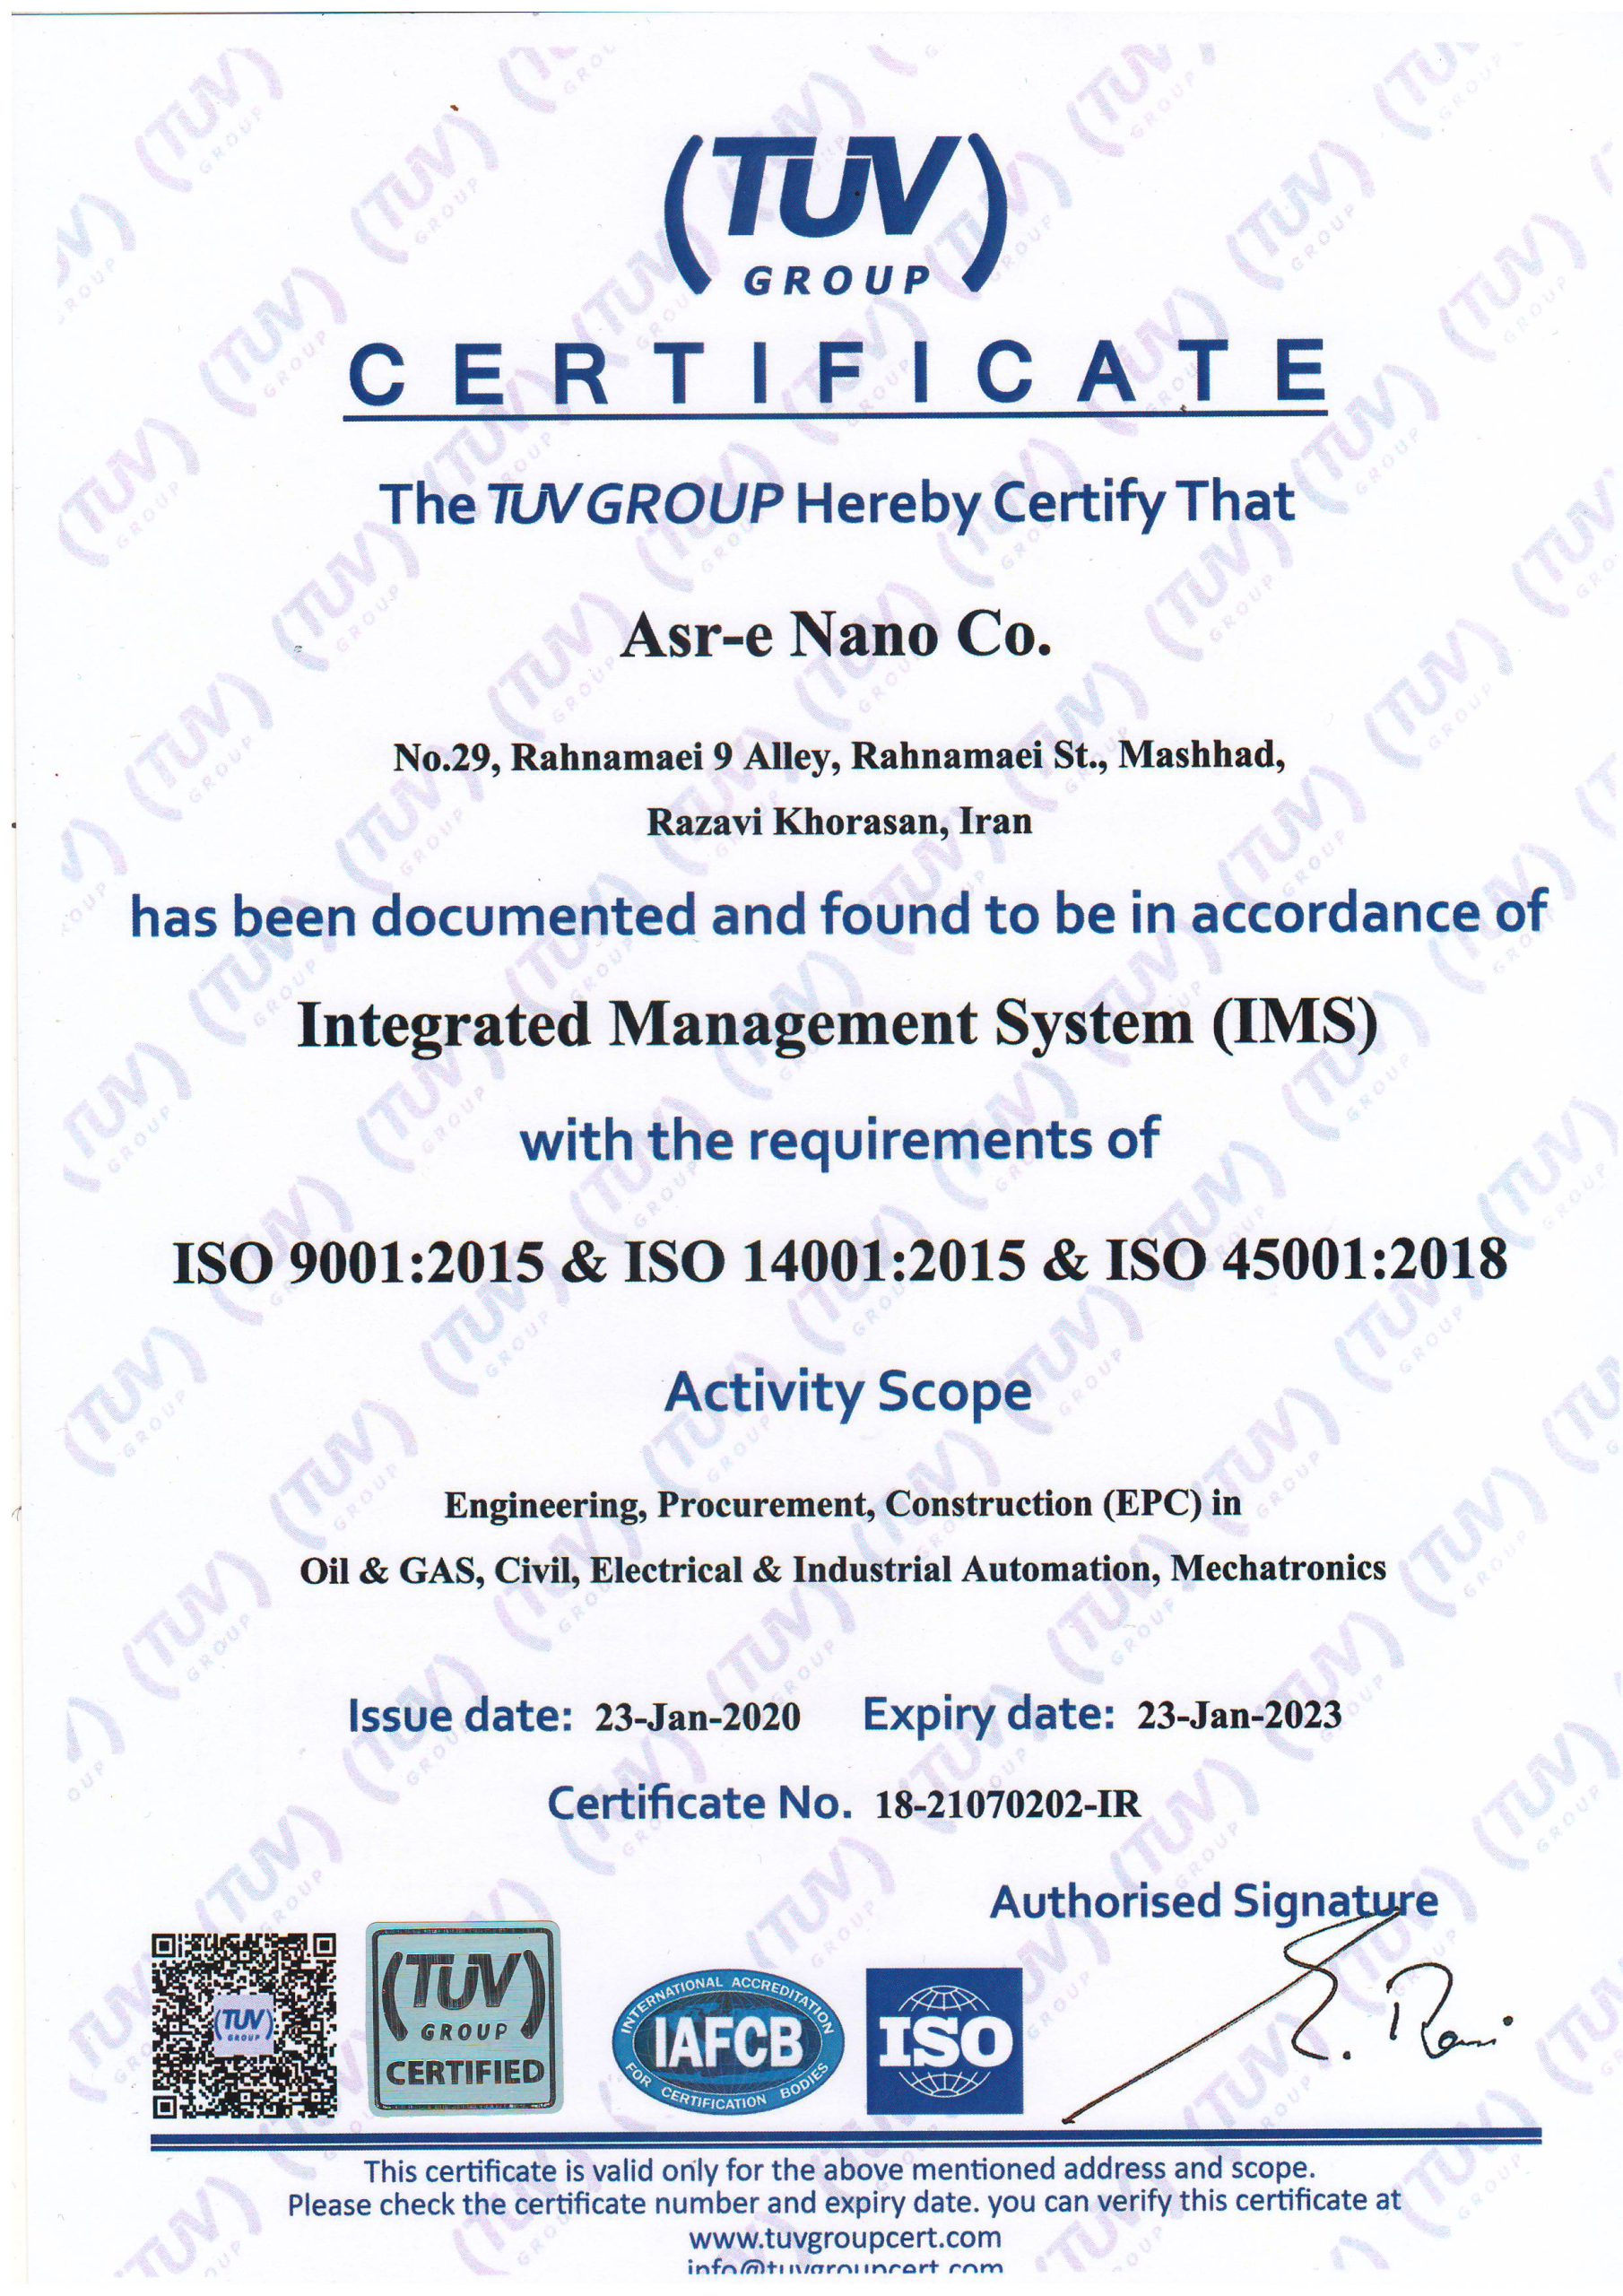 ISO 9001,14001 & 45001